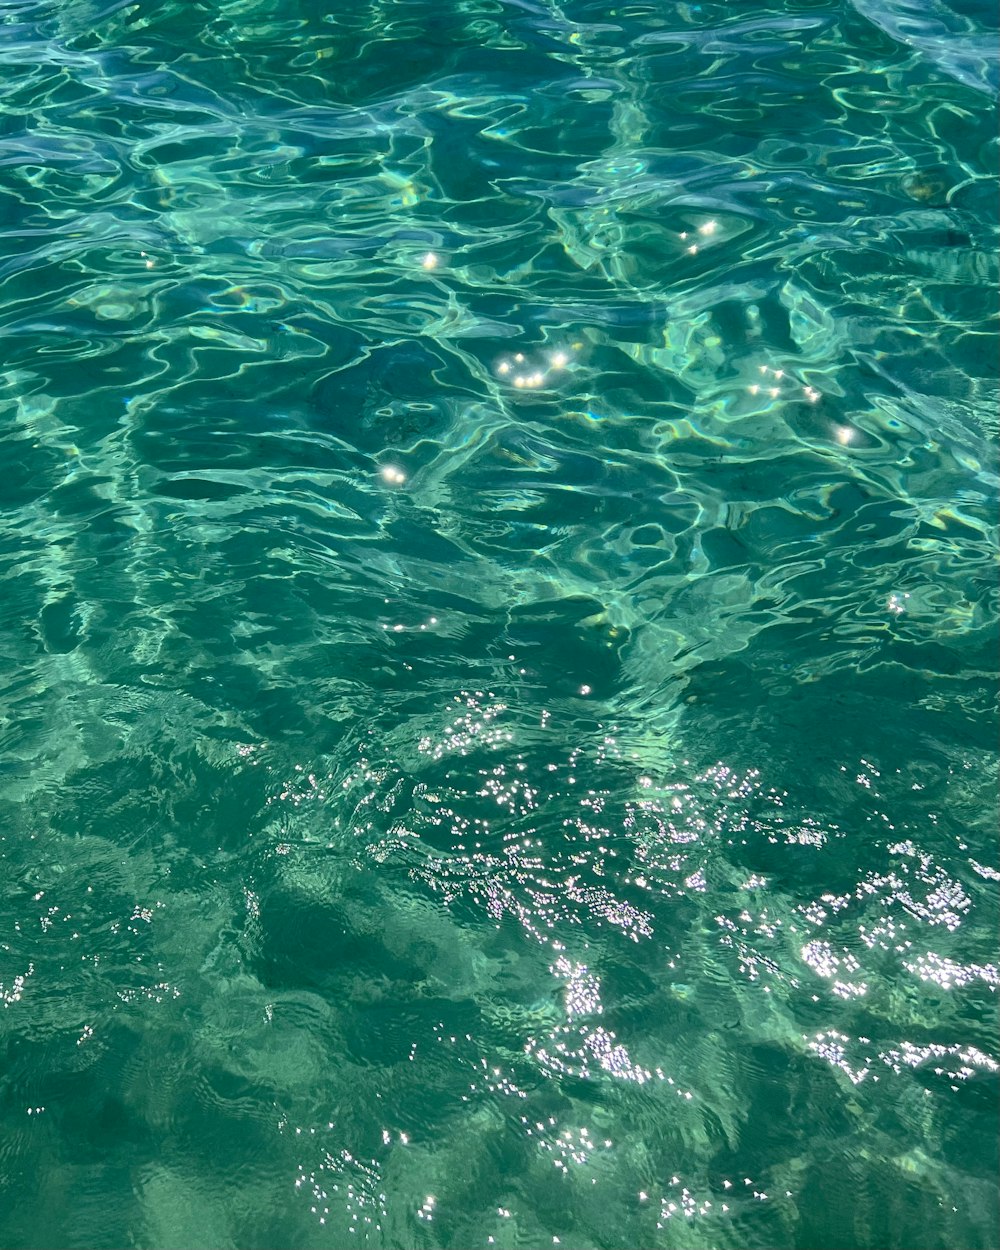 the water is crystal clear and blue